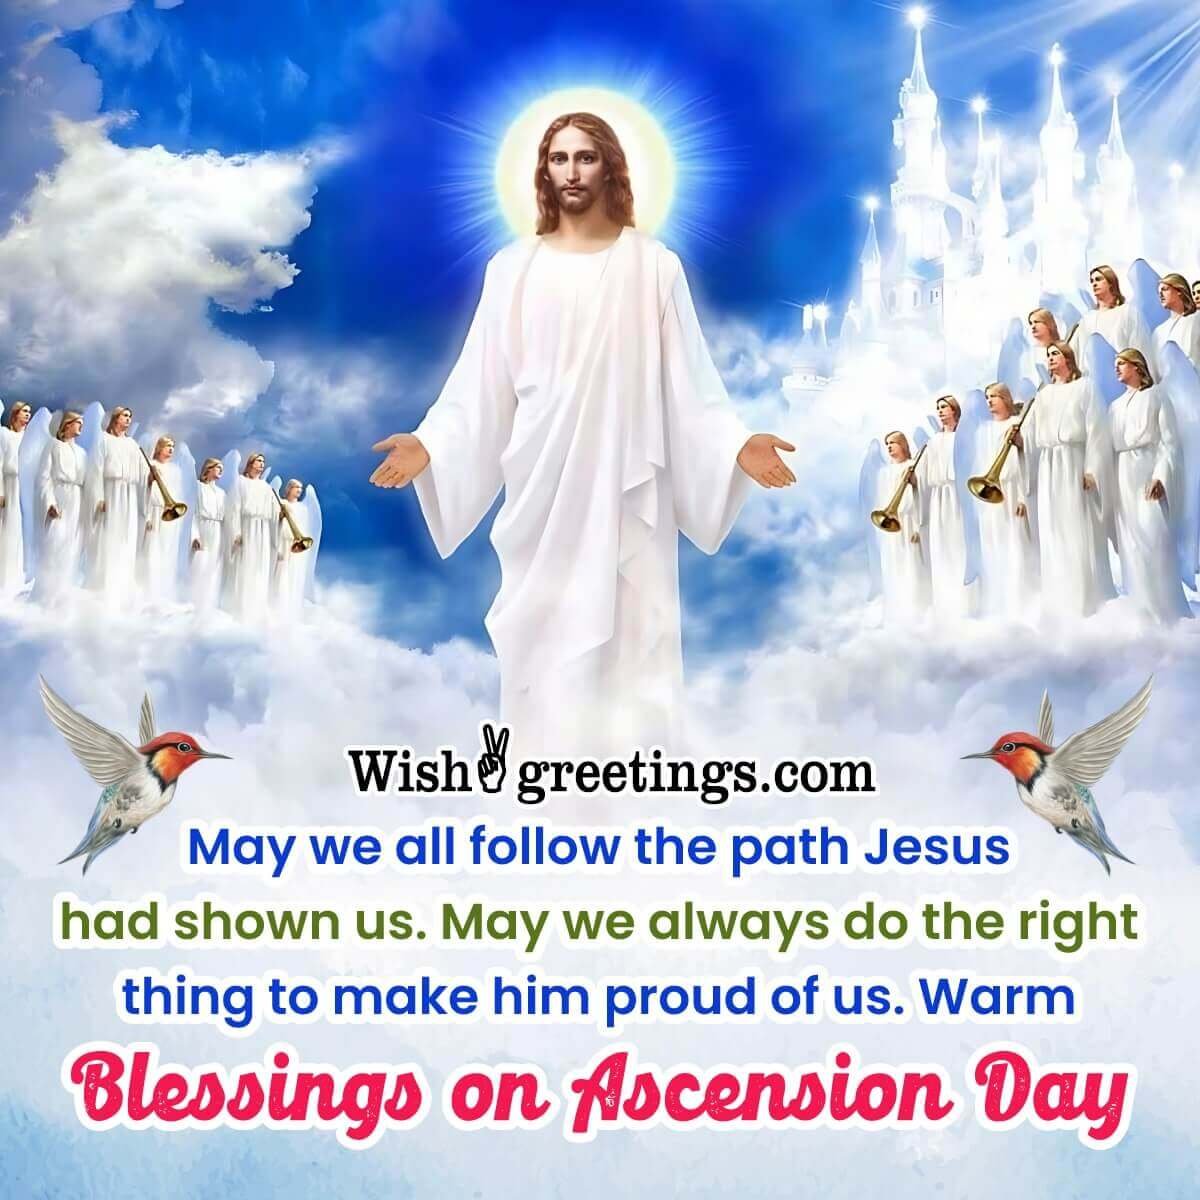 Blessed Ascension Day Message Pic